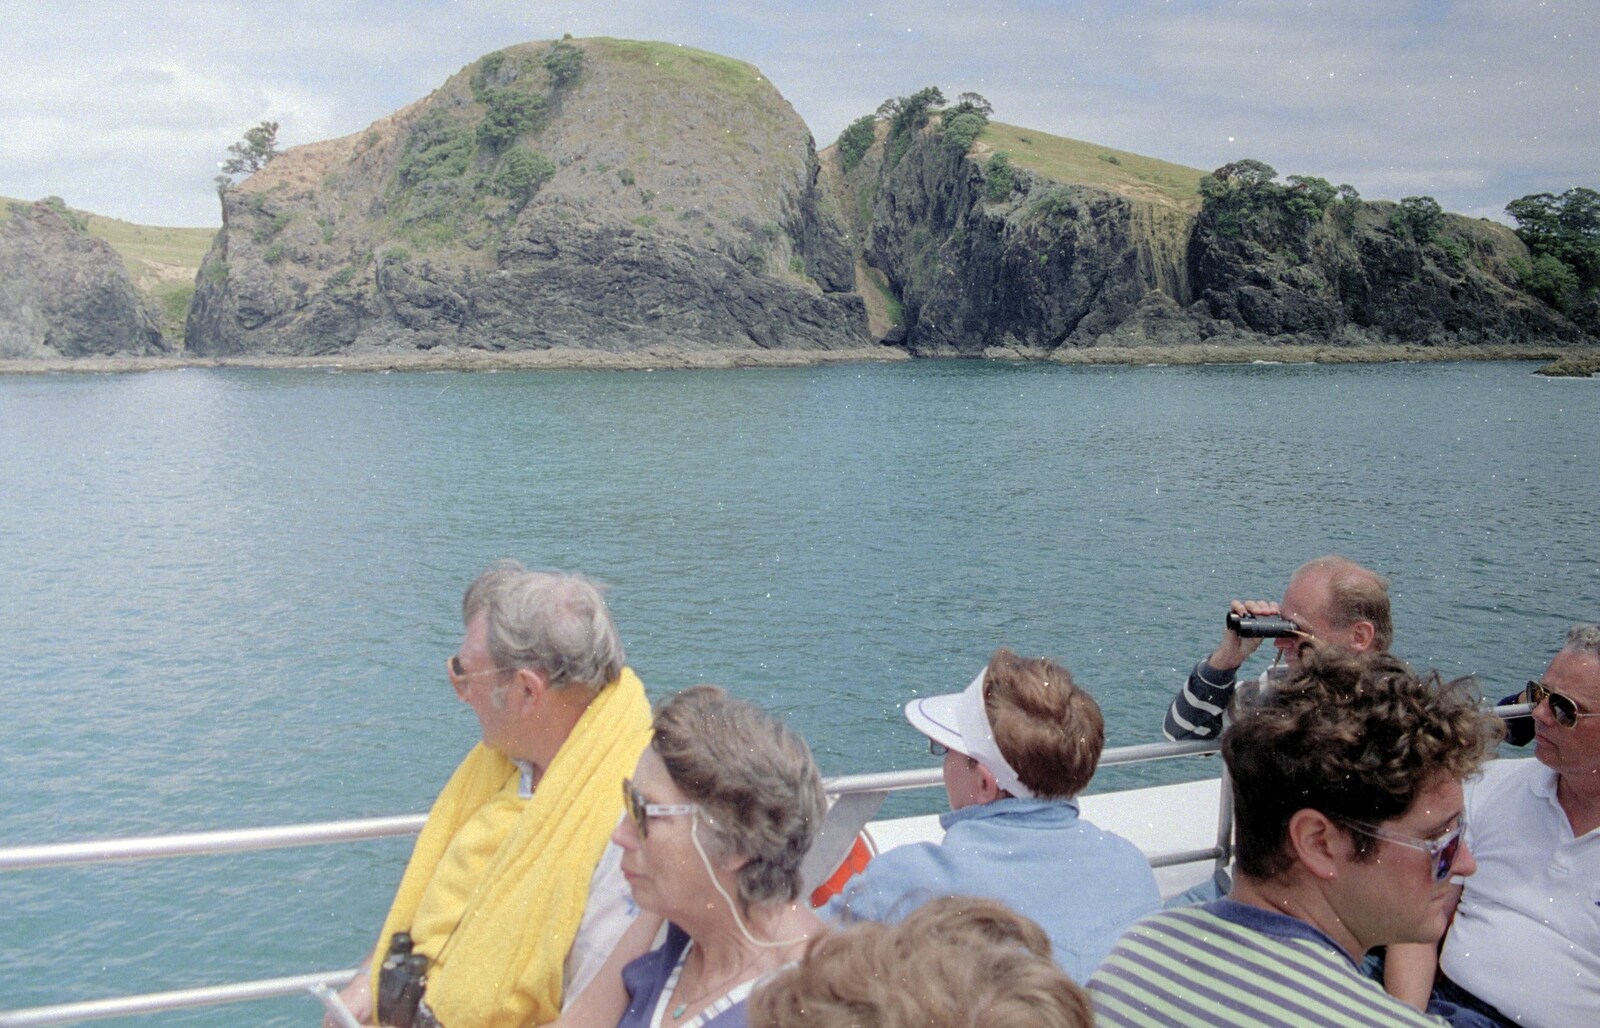 Tourists on a sightseeing boat from The Bay Of Islands, New Zealand - 29th November 1992